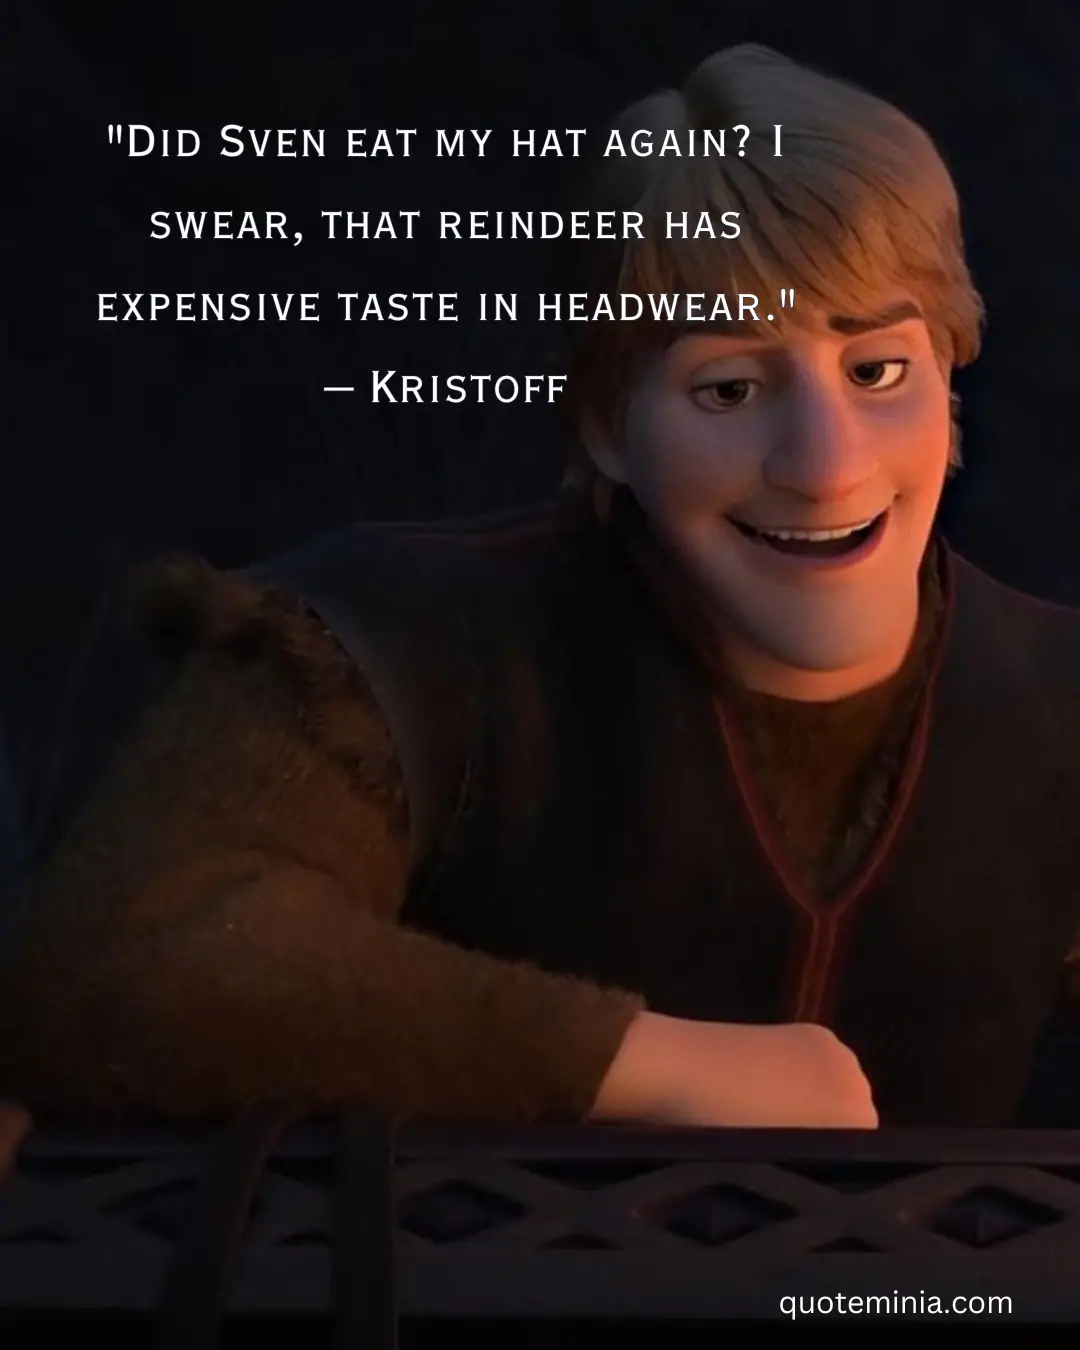 Funny Frozen Quotes 2